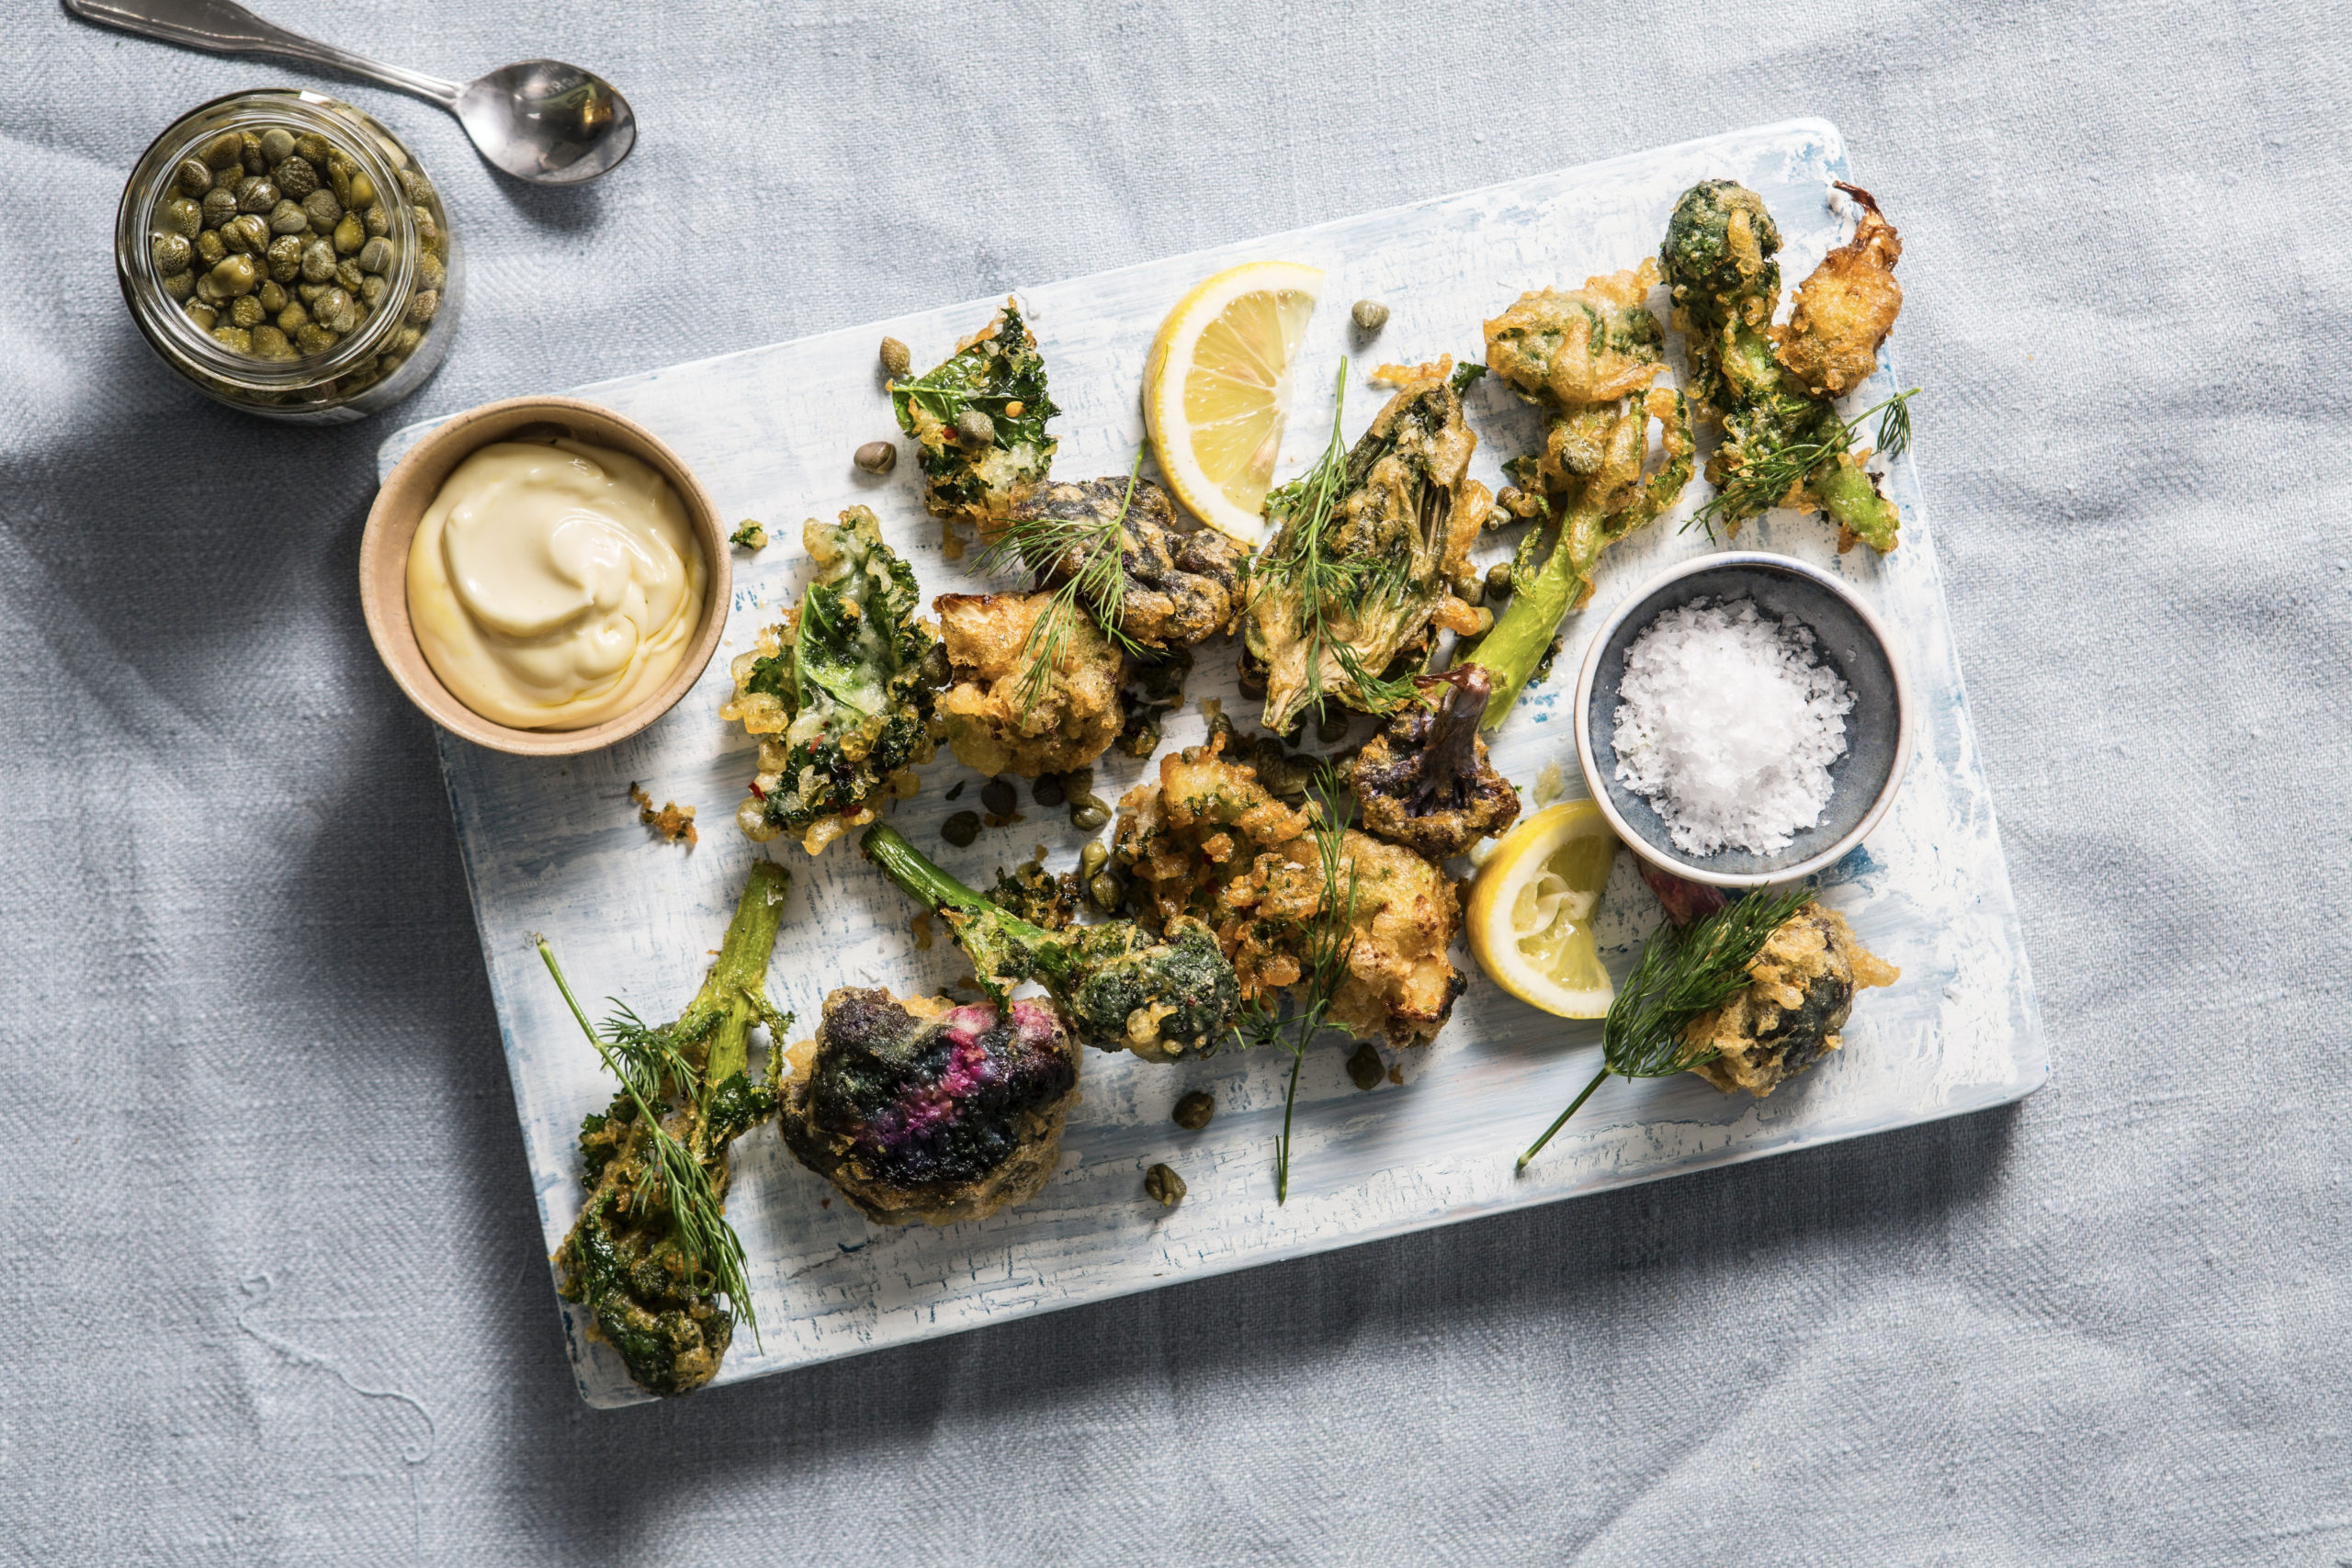 Aioli with lemon and tarragon pairs well with appetizers like these tempura vegetables.